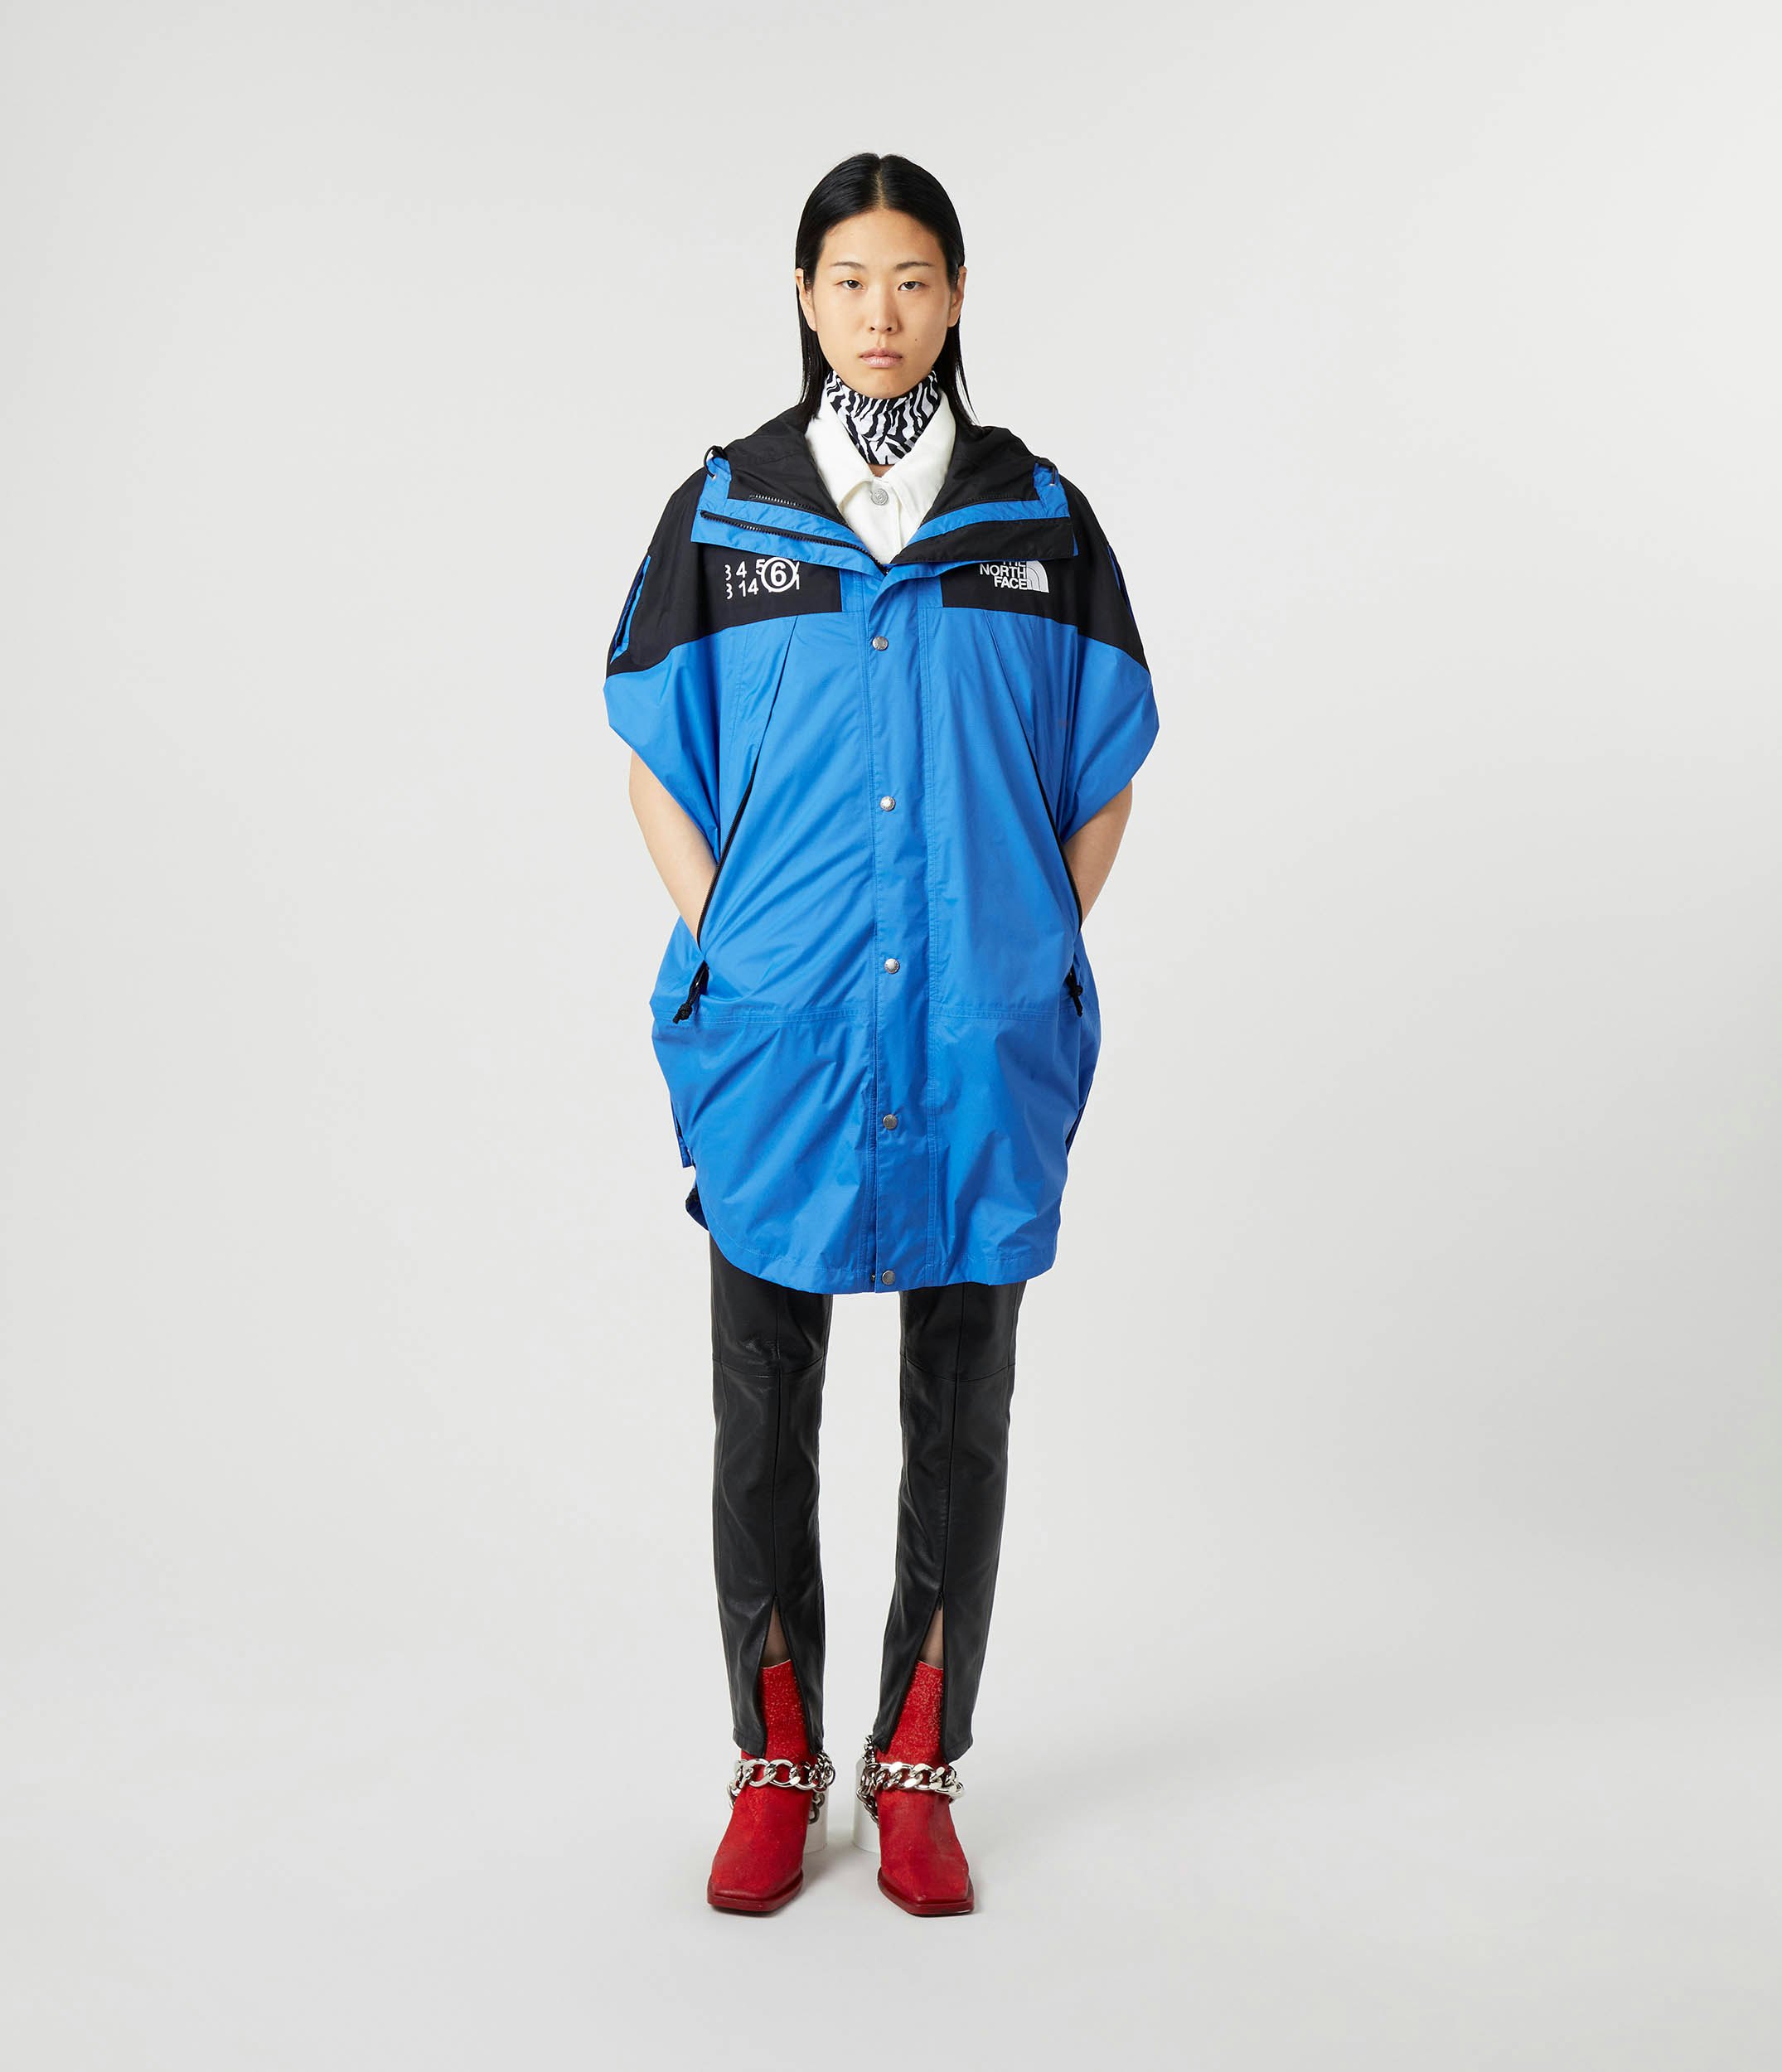 The North Face and MM6 Maison Margiela's outrageous outdoor gear